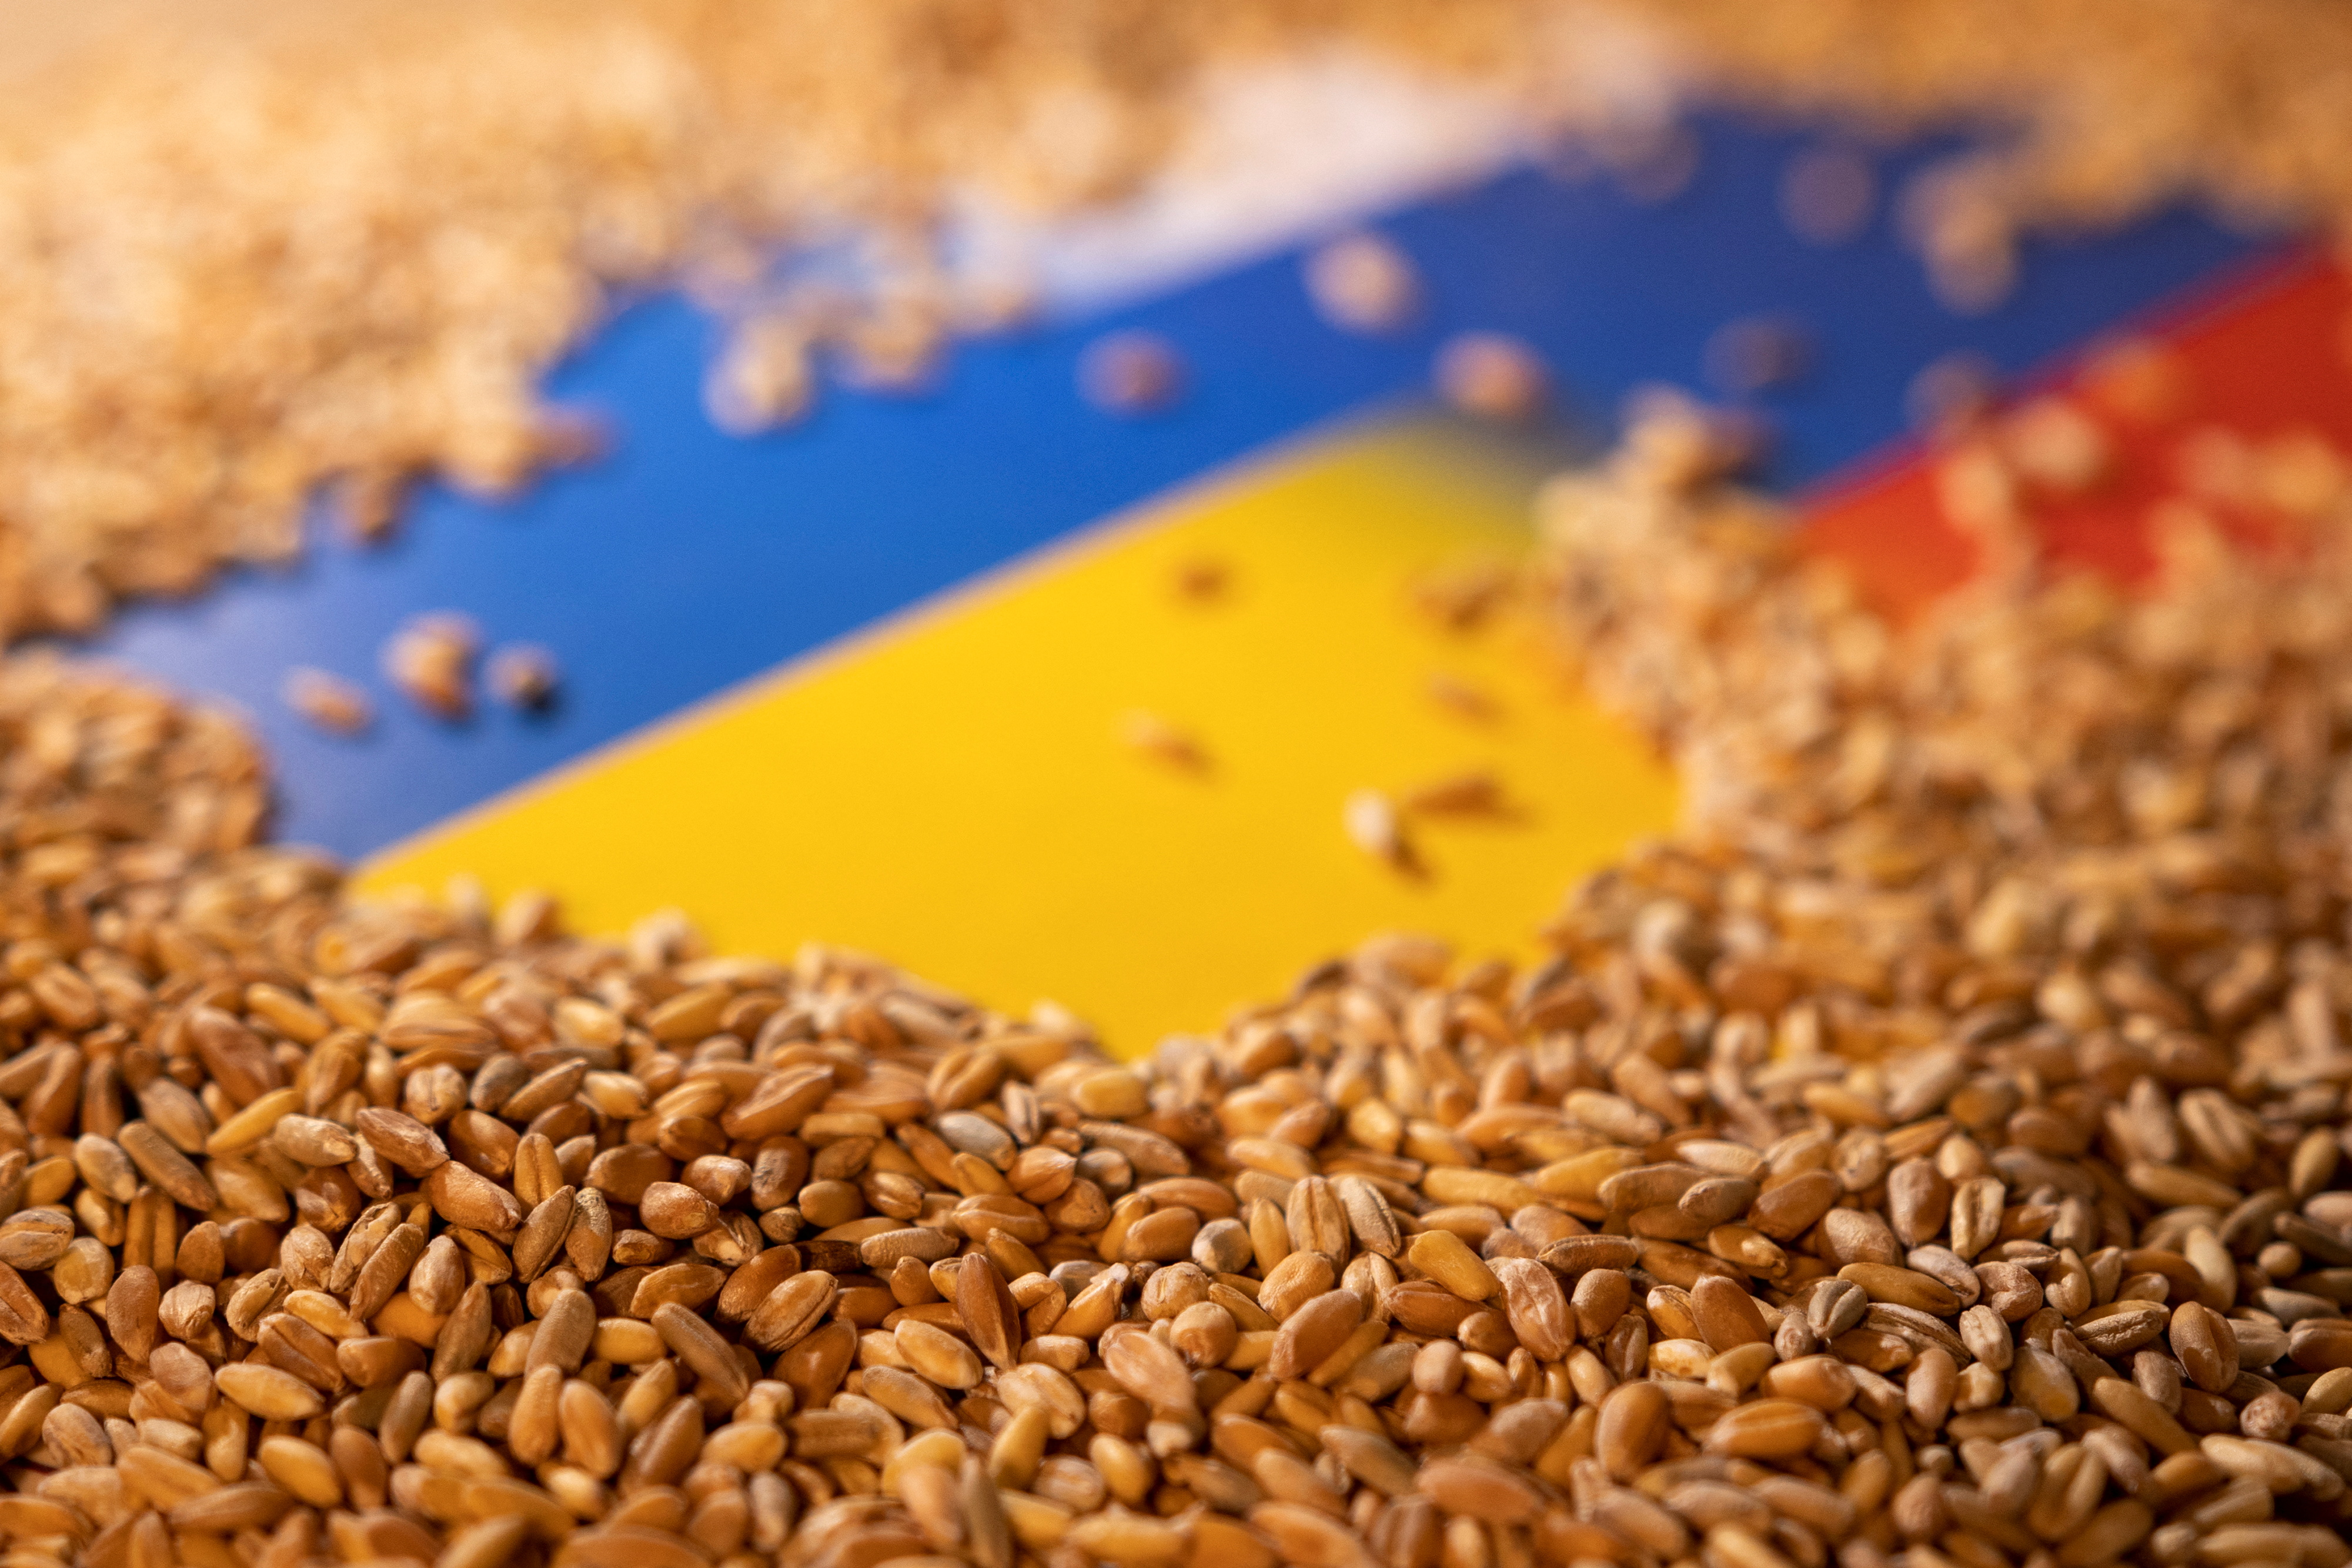 Illustration shows Ukrainian and Russian flags and grain